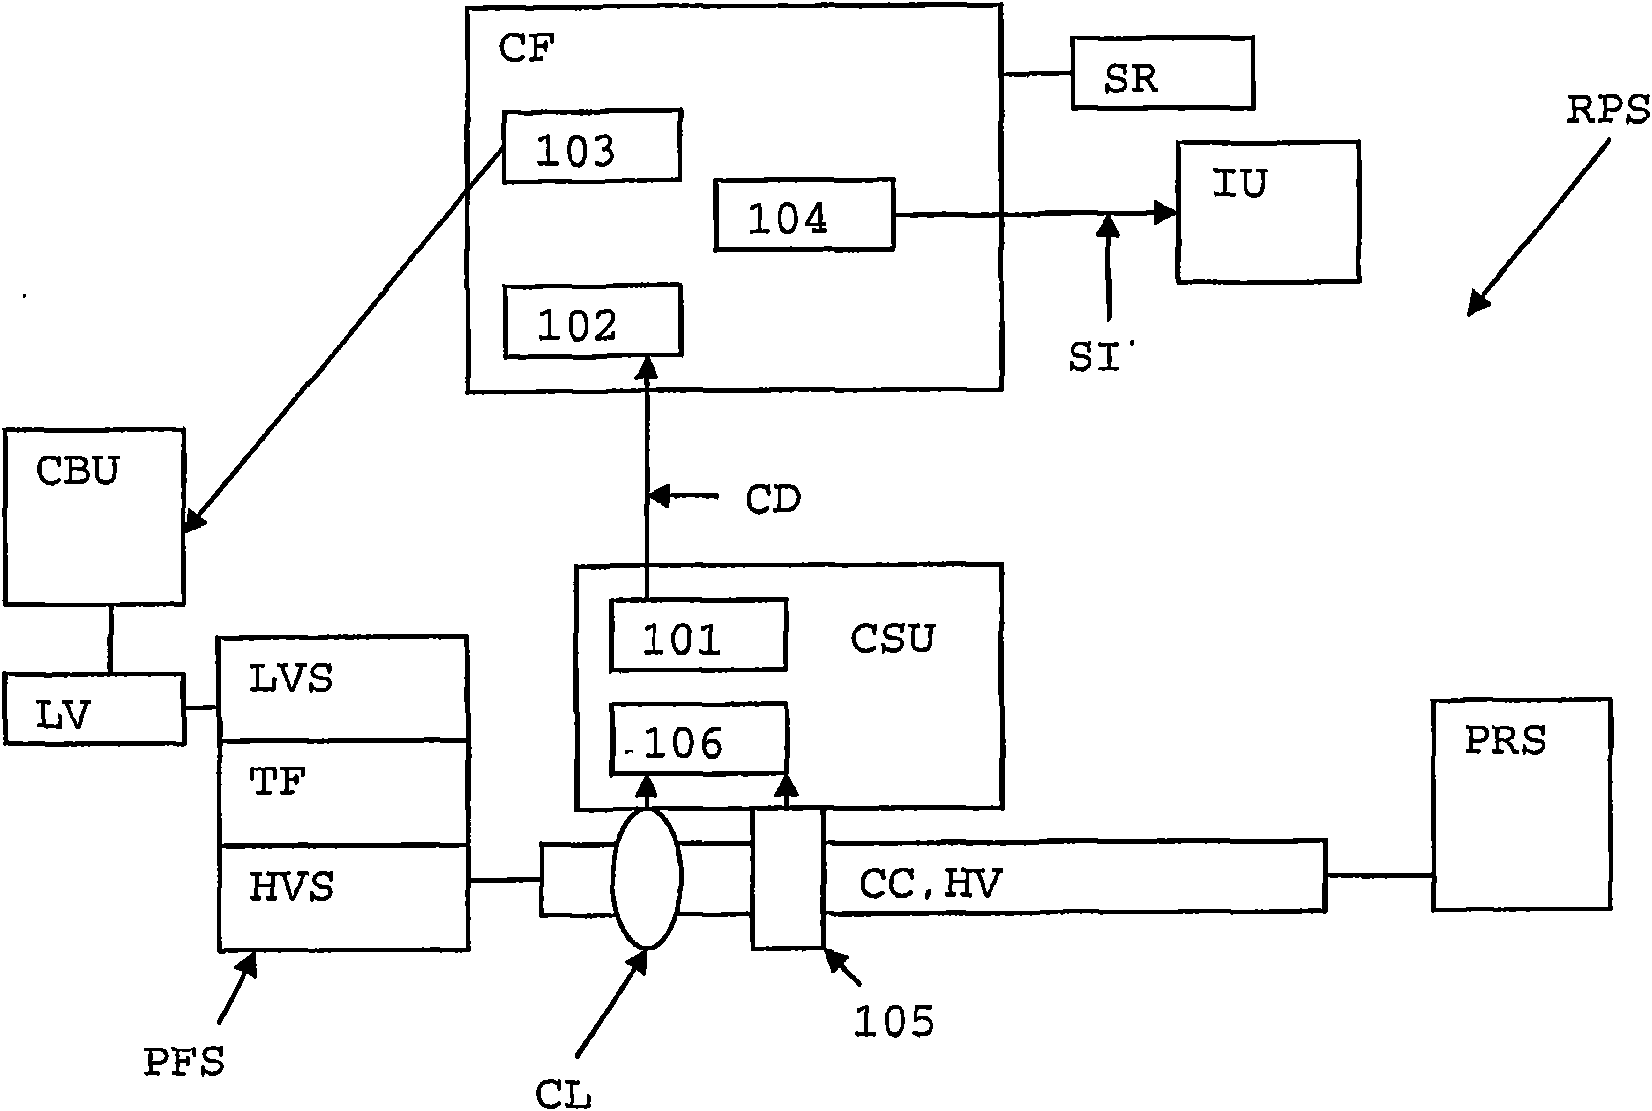 Power station for power transmission to remotely located load